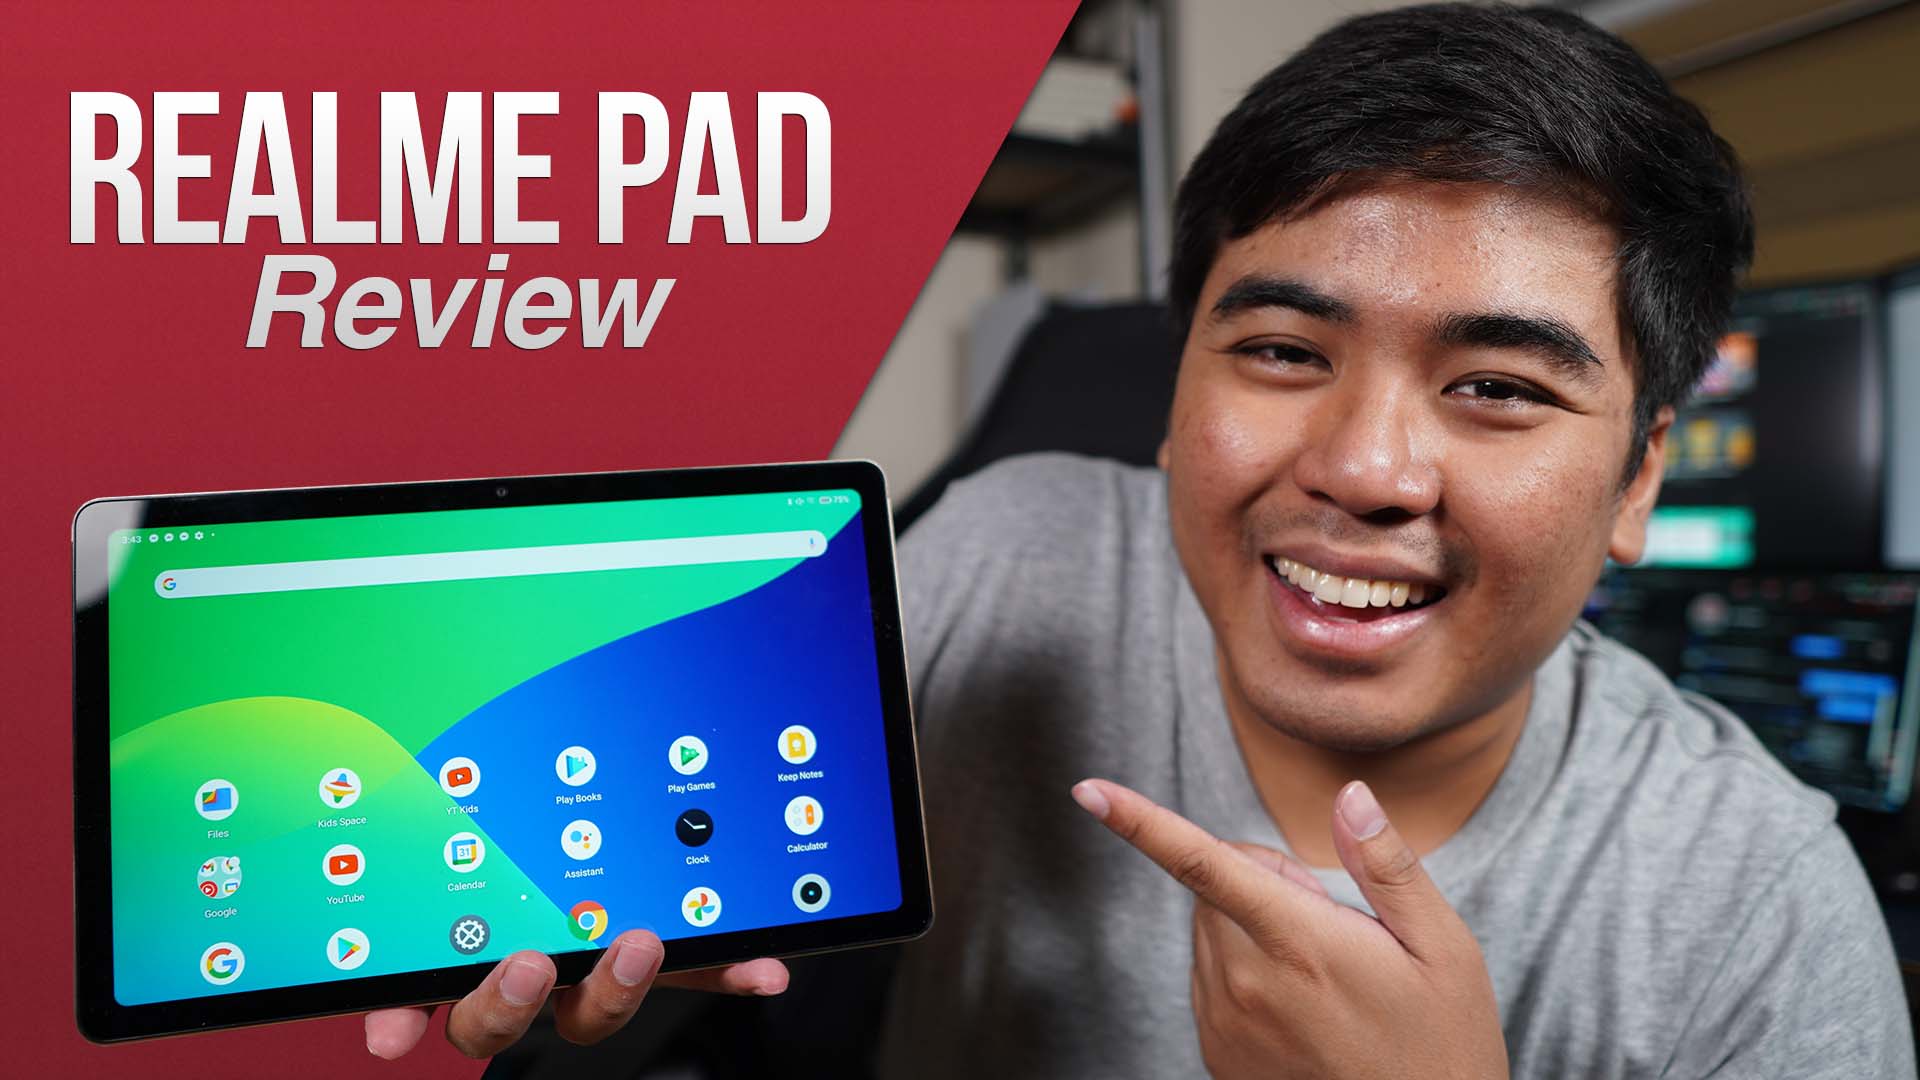 Realme Pad Video Review Tablet Made For Entertainment Jam Online Philippines Tech News